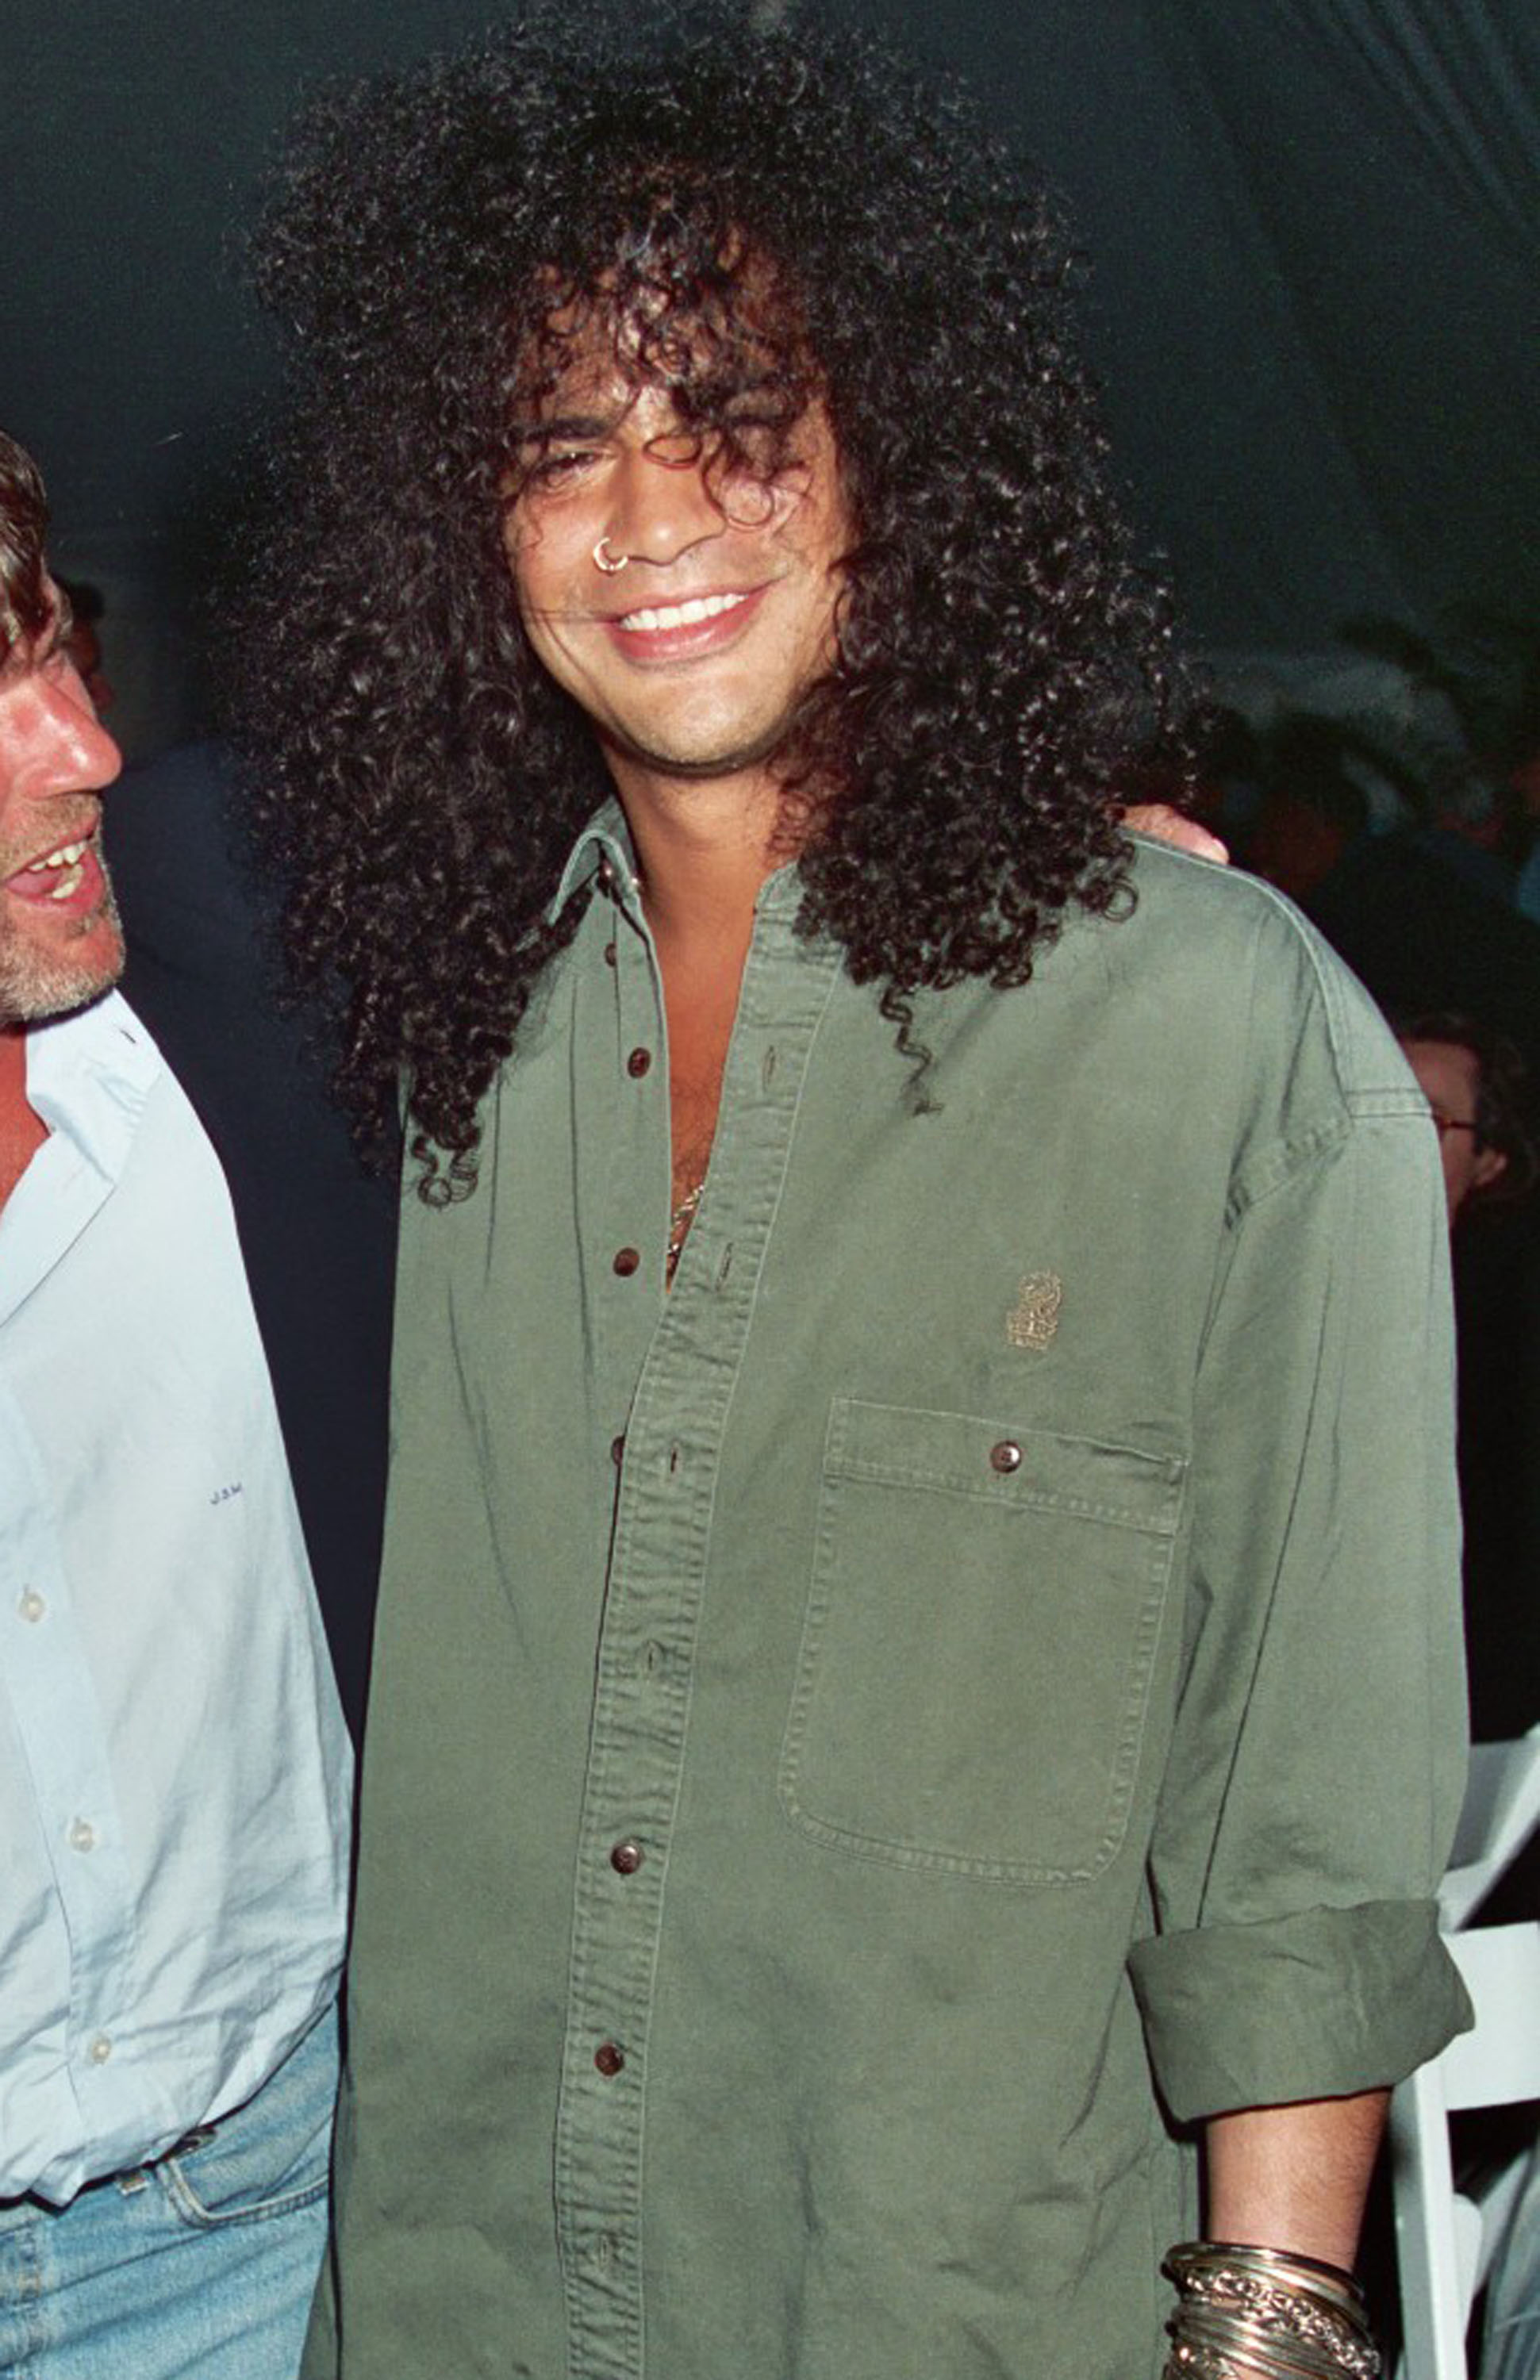 Slash of Guns N' Roses during the Grand Opening of the Rock and Roll Hall of Fame Museum on September 7, 1995, in Cleveland, Ohio. | Source: Getty Images